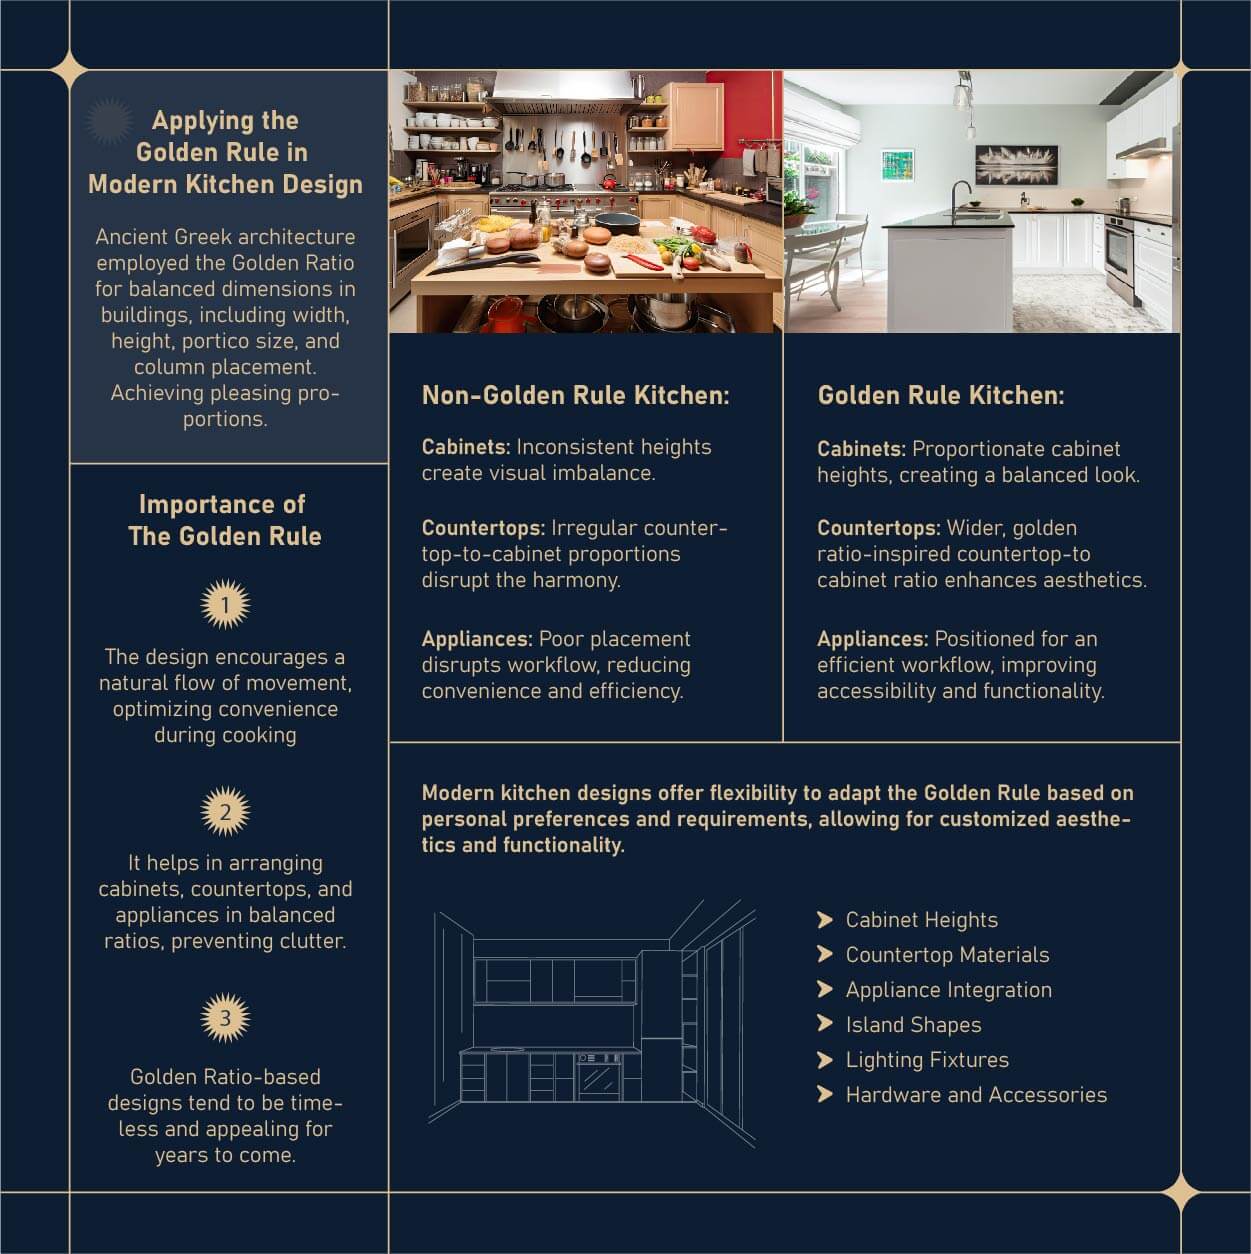 The Golden Rule of Kitchen Design Infographic